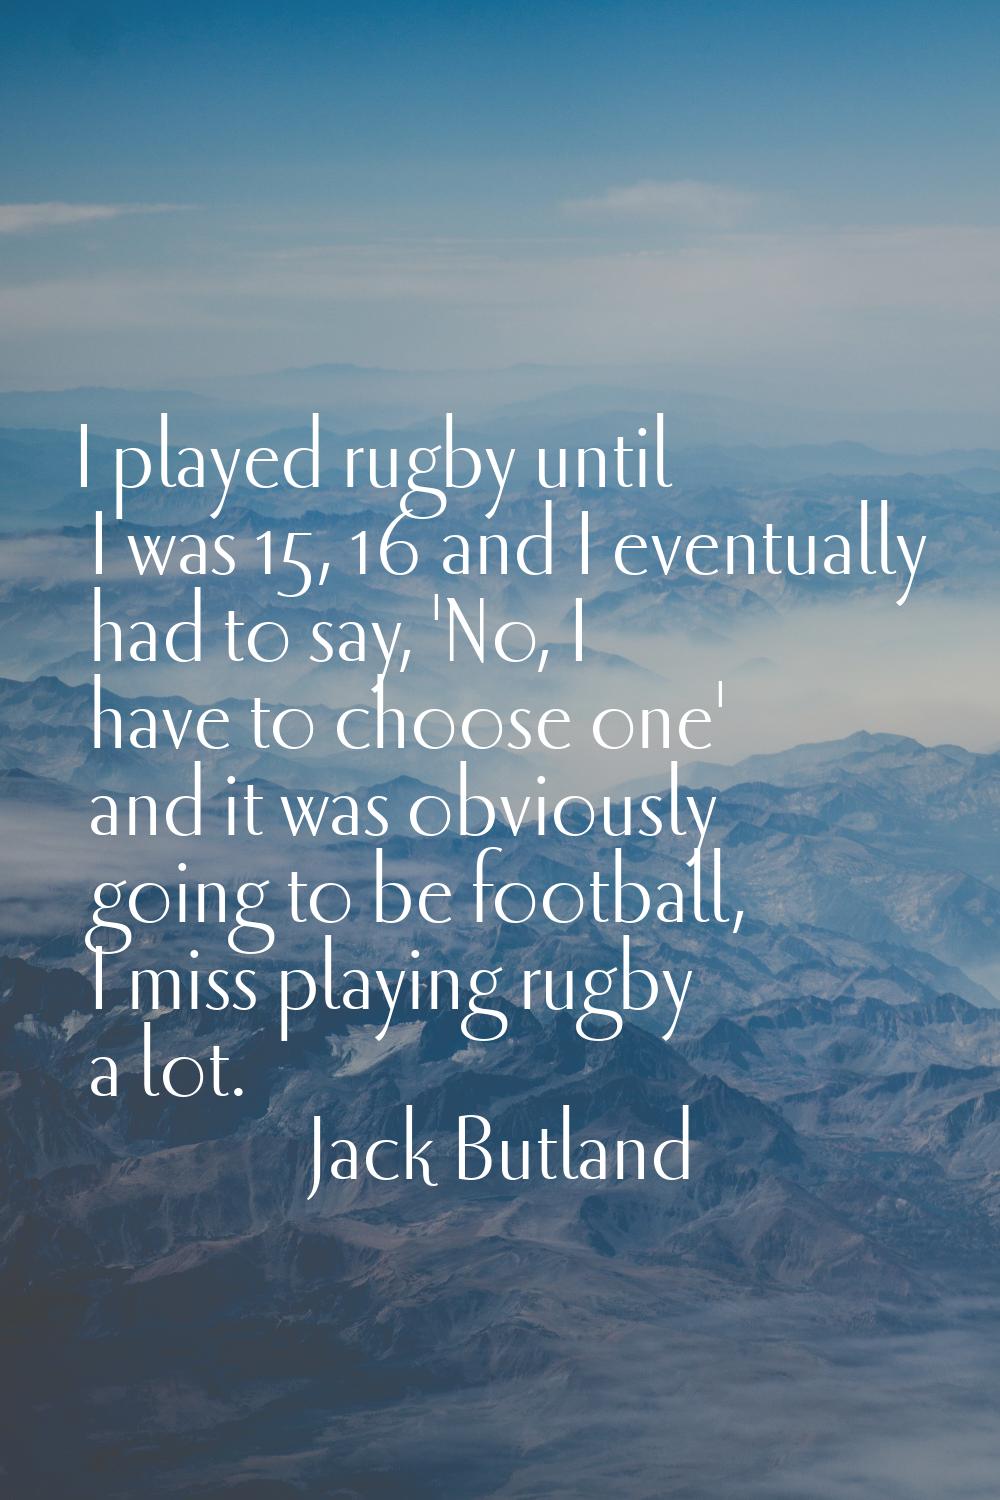 I played rugby until I was 15, 16 and I eventually had to say, 'No, I have to choose one' and it wa